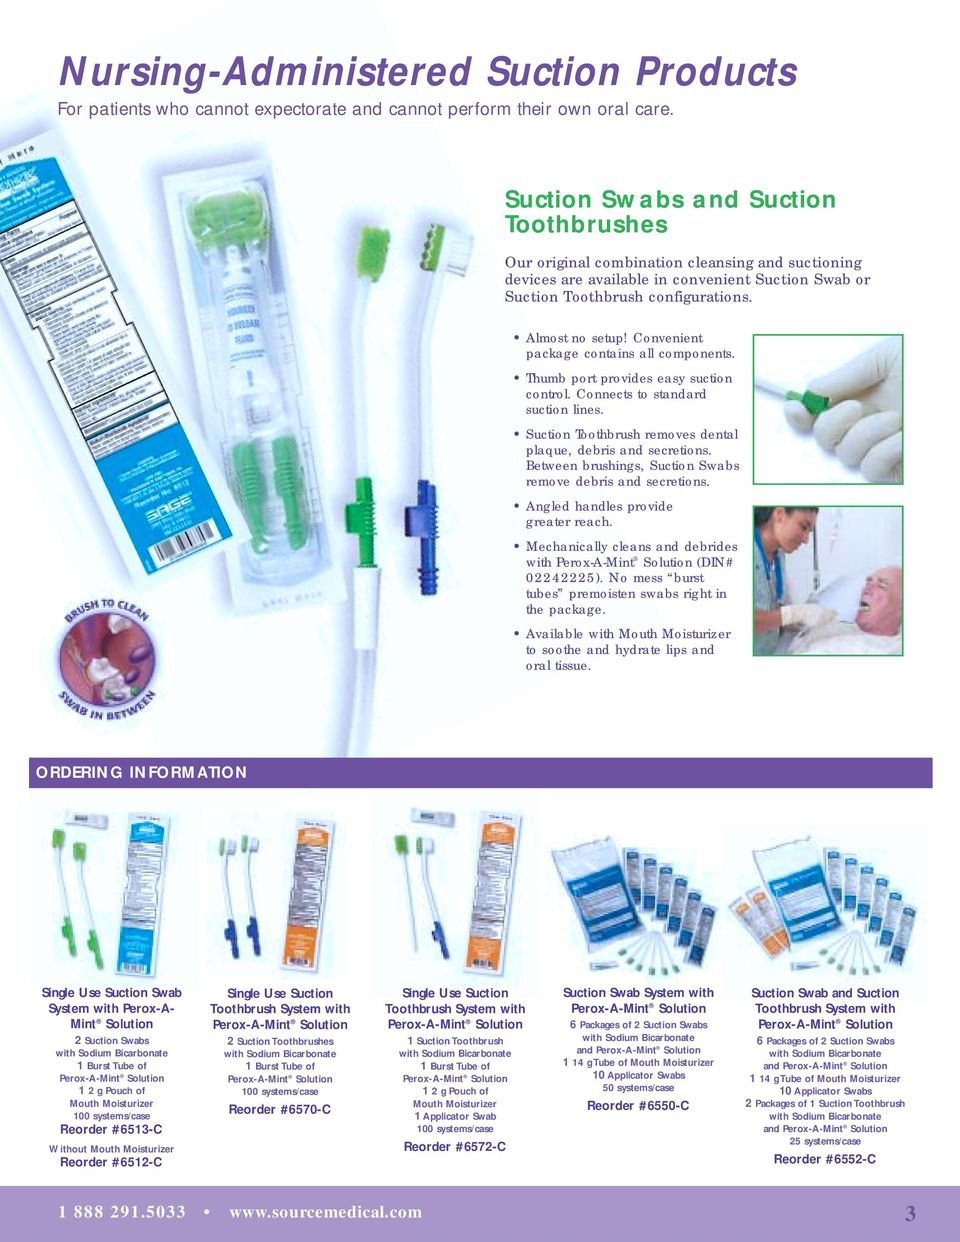 Convenient package contains all components. Thumb port provides easy suction control. Connects to standard suction lines. Suction Toothbrush removes dental plaque, debris and secretions.